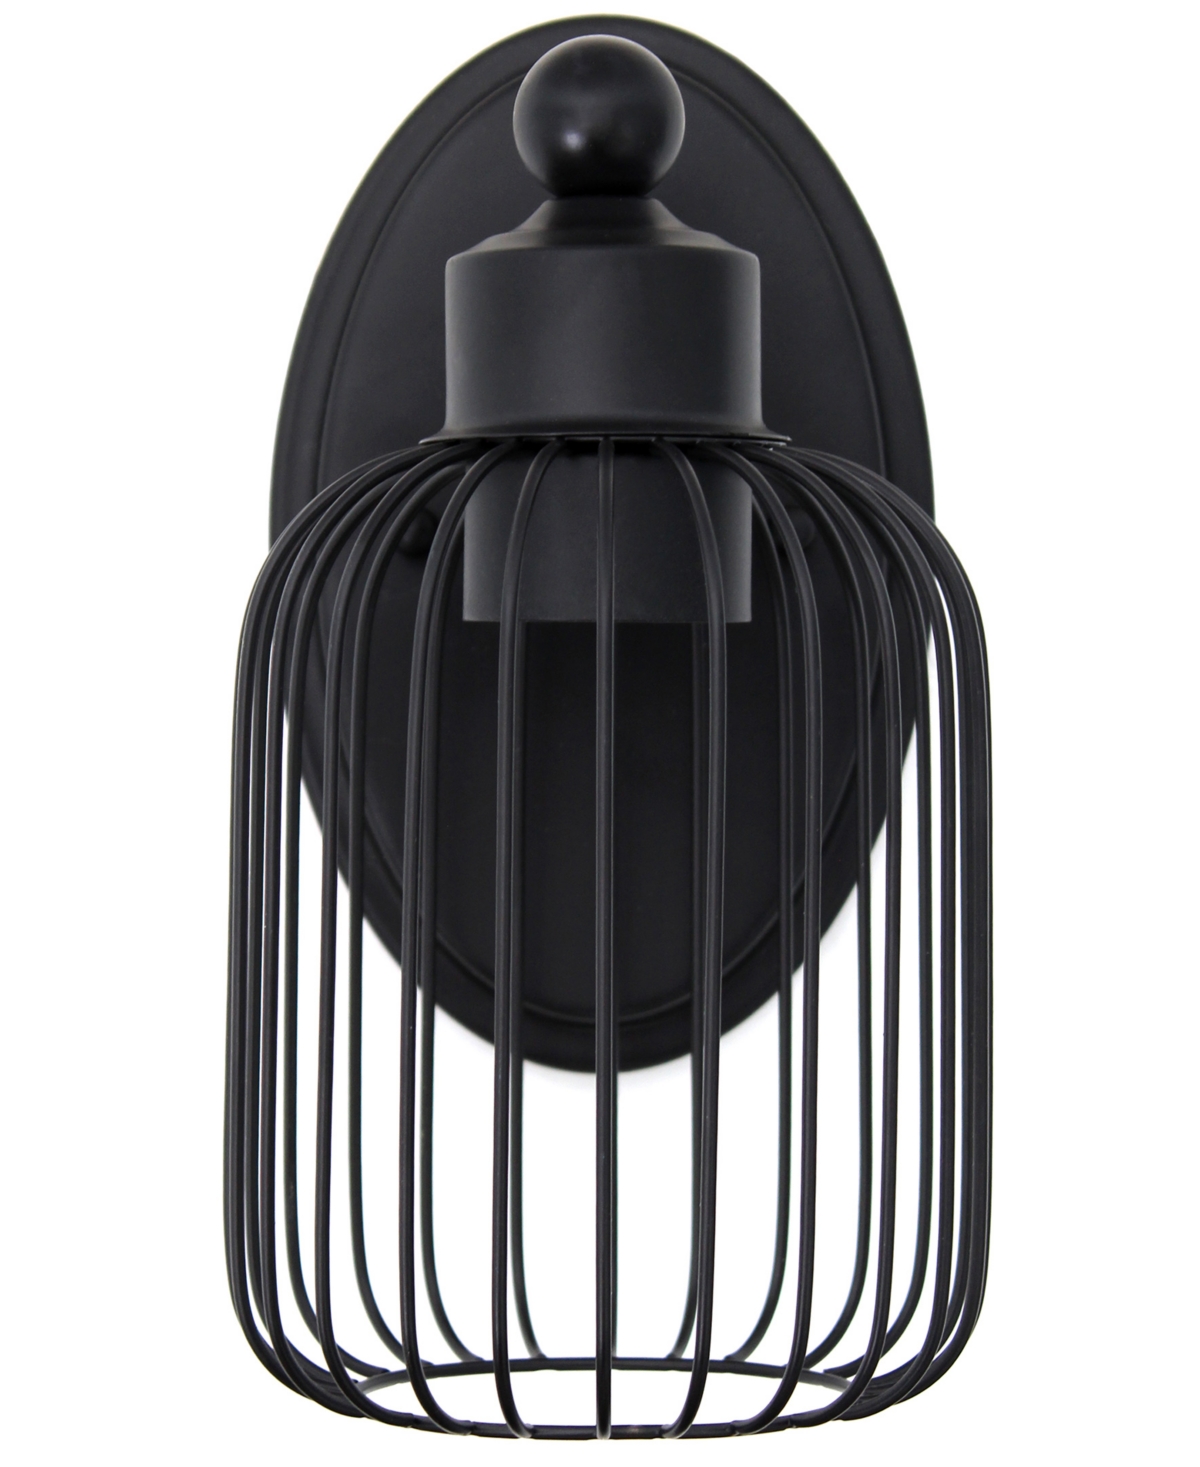 Shop Lalia Home Ironhouse 10.5" One Light Industrial Decorative Cage Wall Sconce Uplight Downlight Wall Mounted Fixt In Black